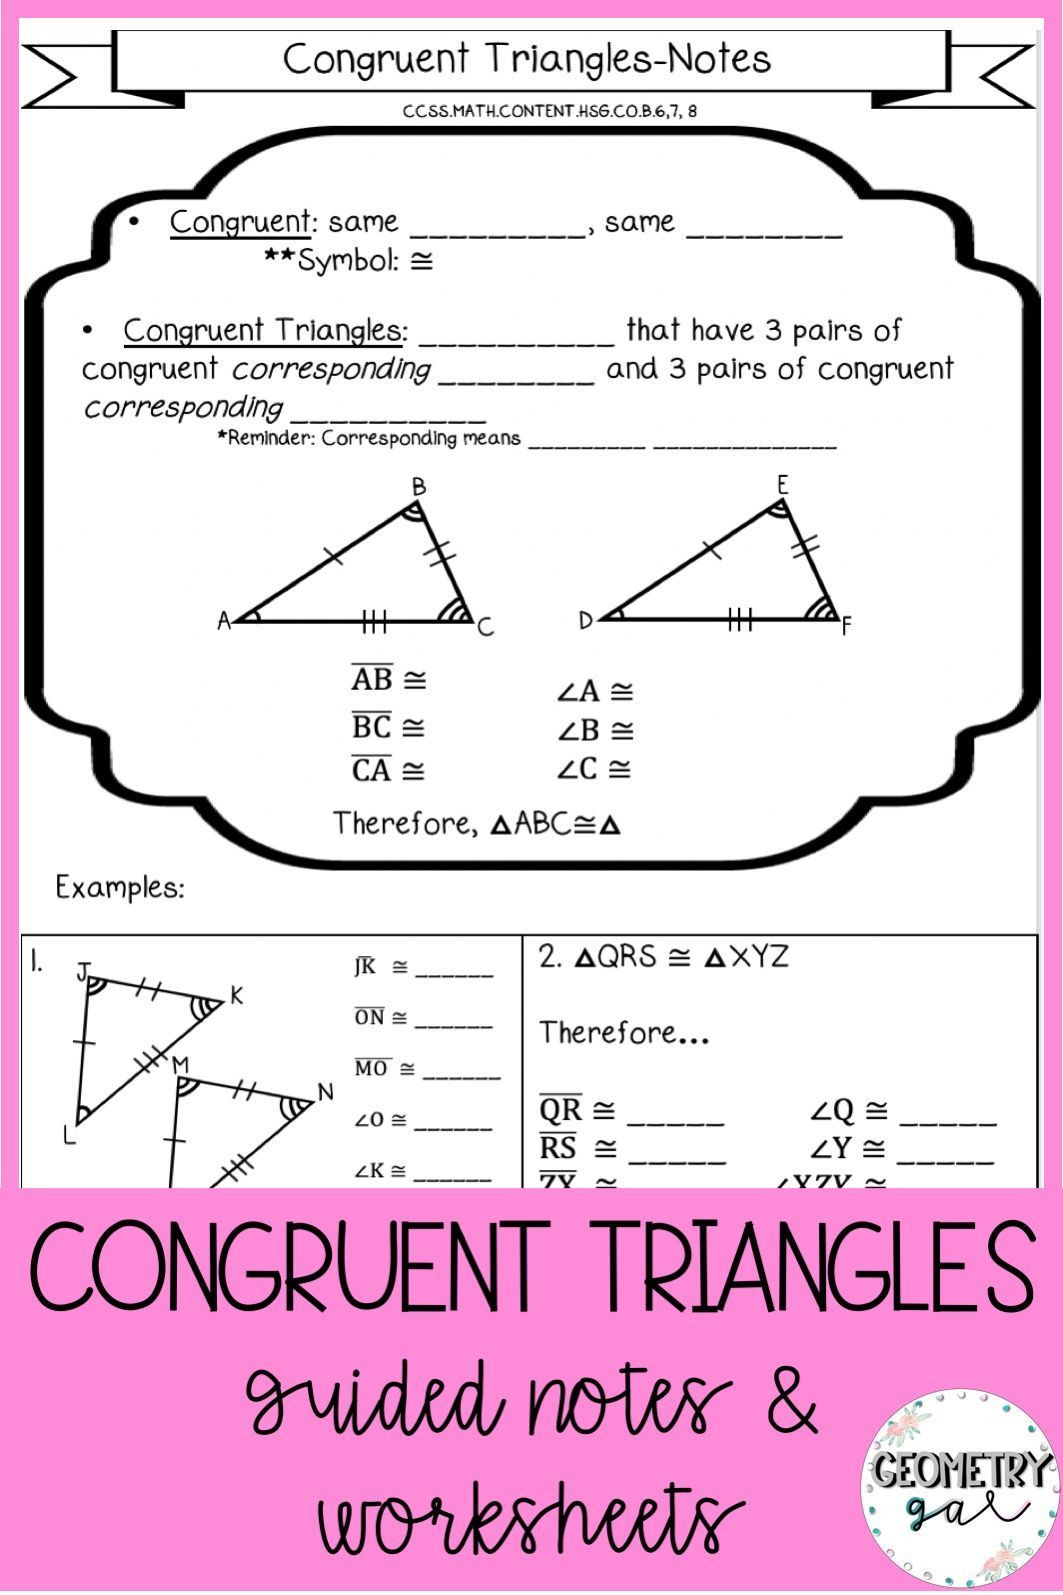 Congruent Triangles Worksheet Answers Congruent Triangles Notes and Worksheets